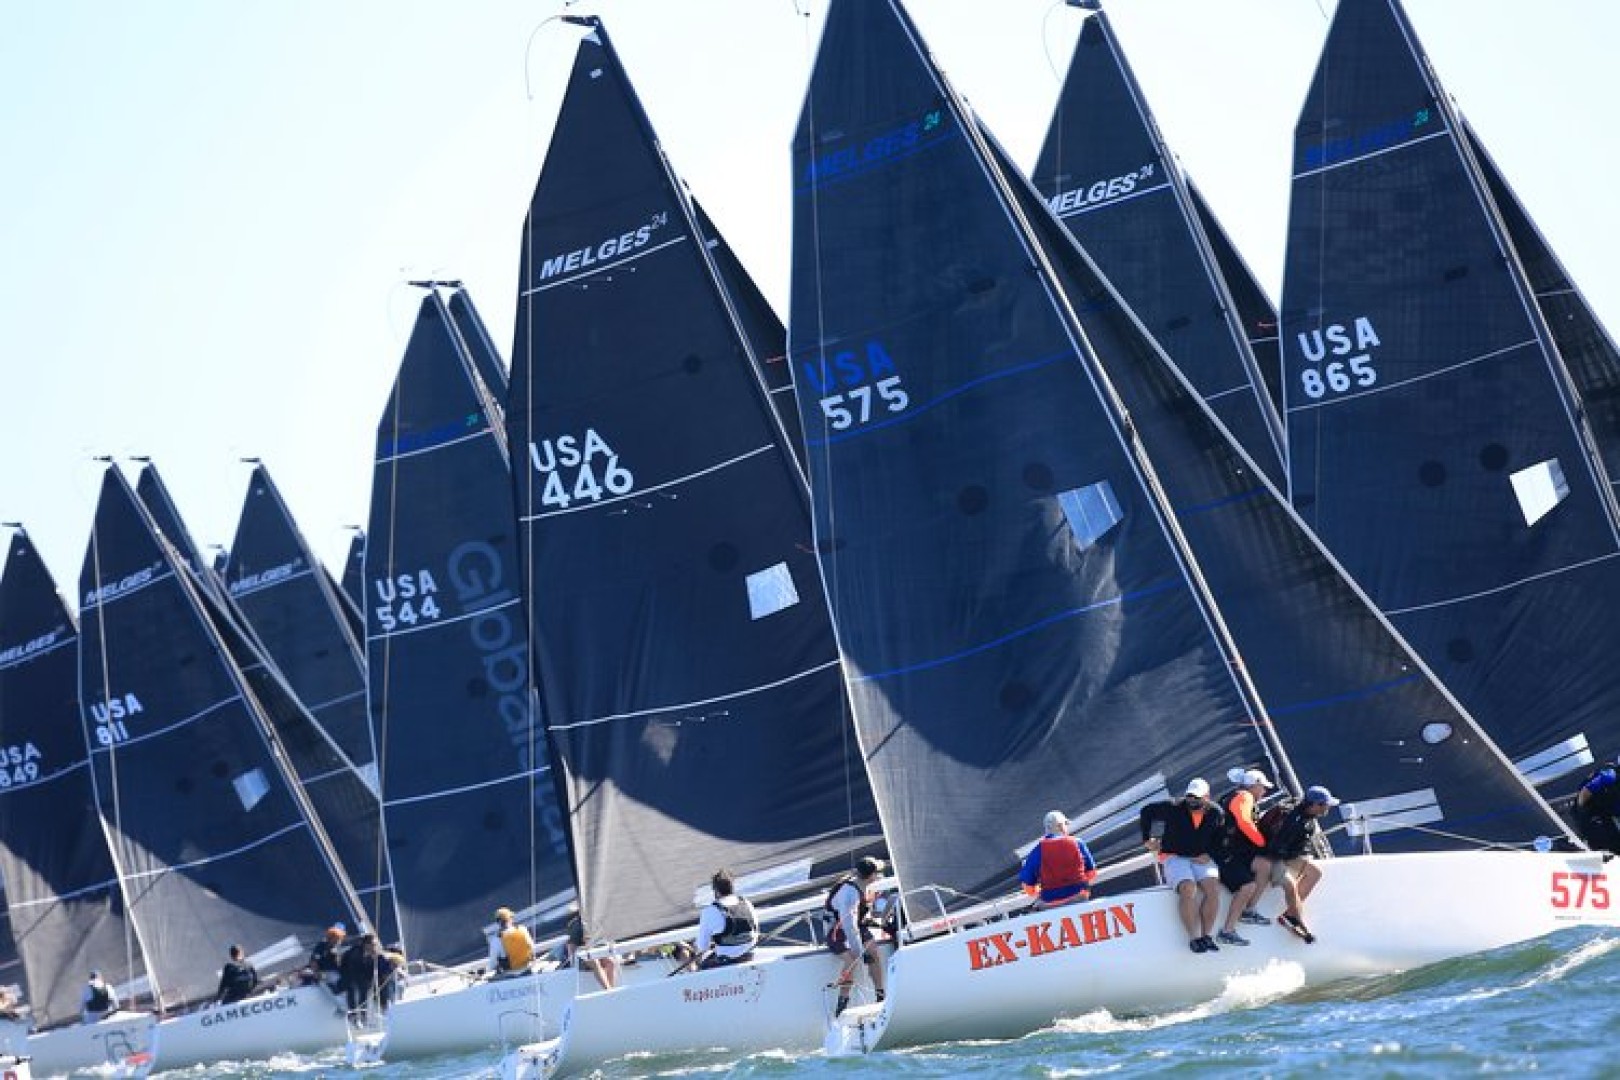 2023 Nationals promises epic event celebrating 30 years of Melges 24 Racing